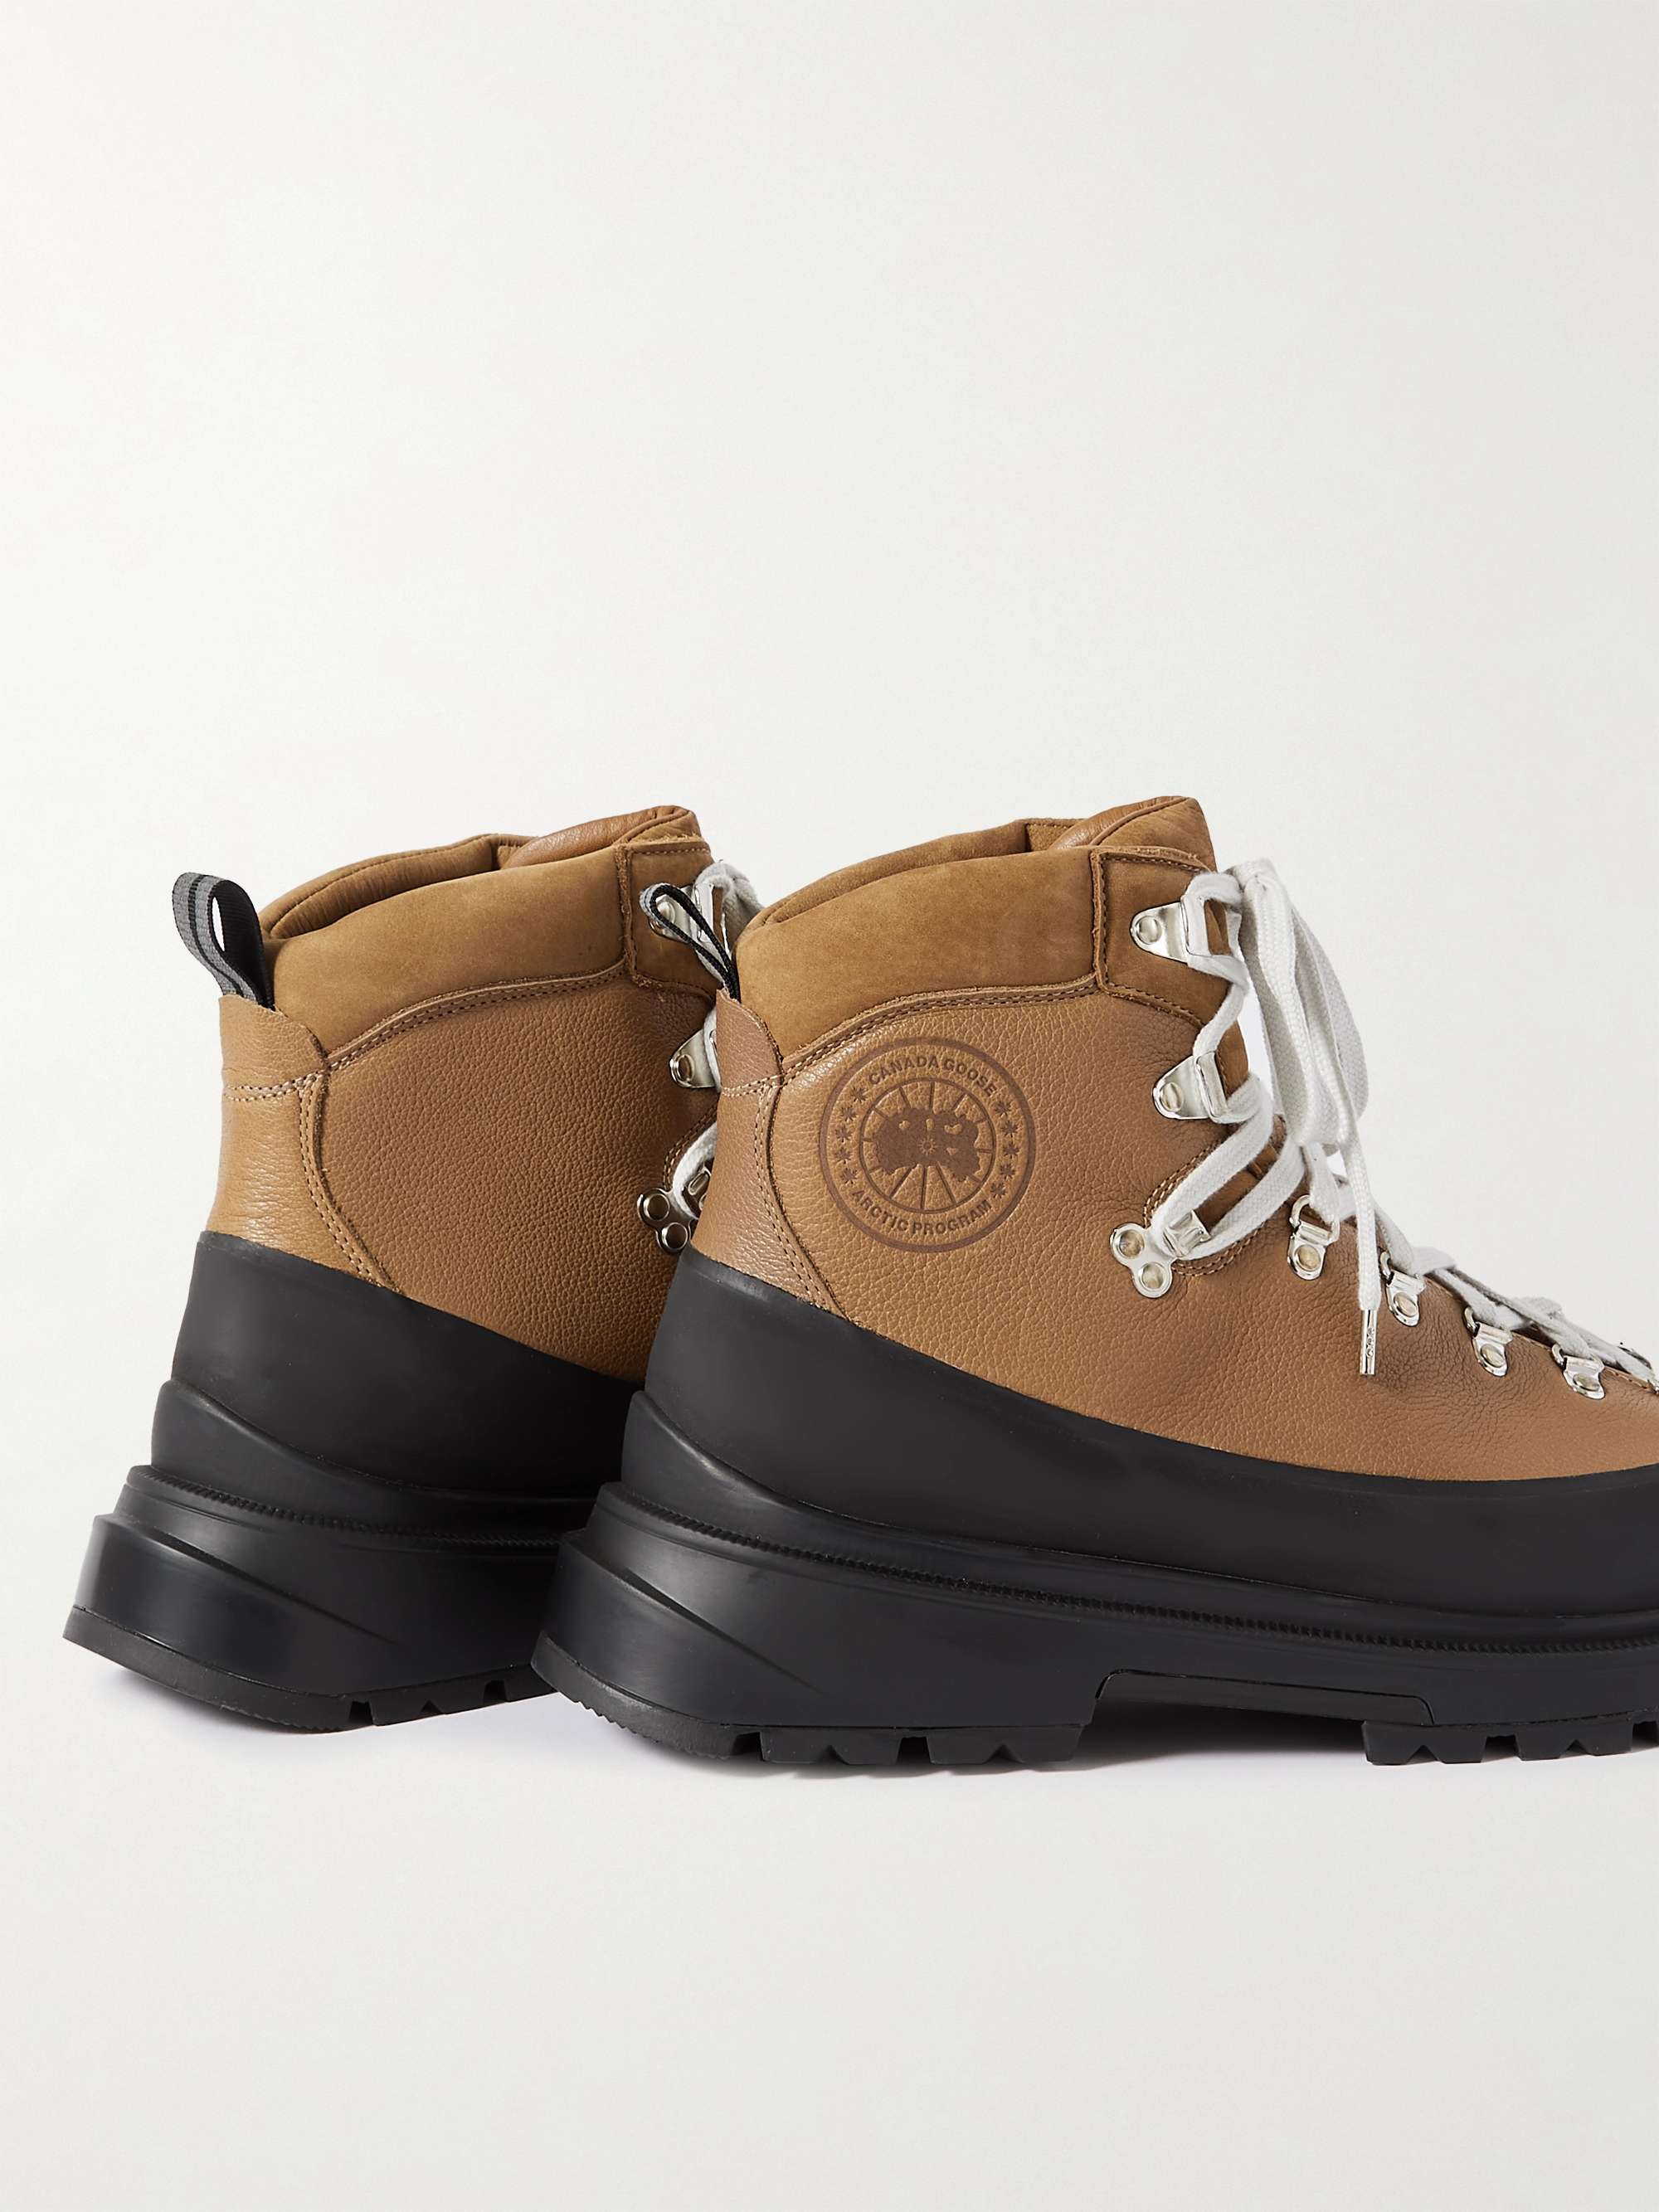 CANADA GOOSE Journey Rubber and Nubuck-Trimmed Suede Hiking Boots